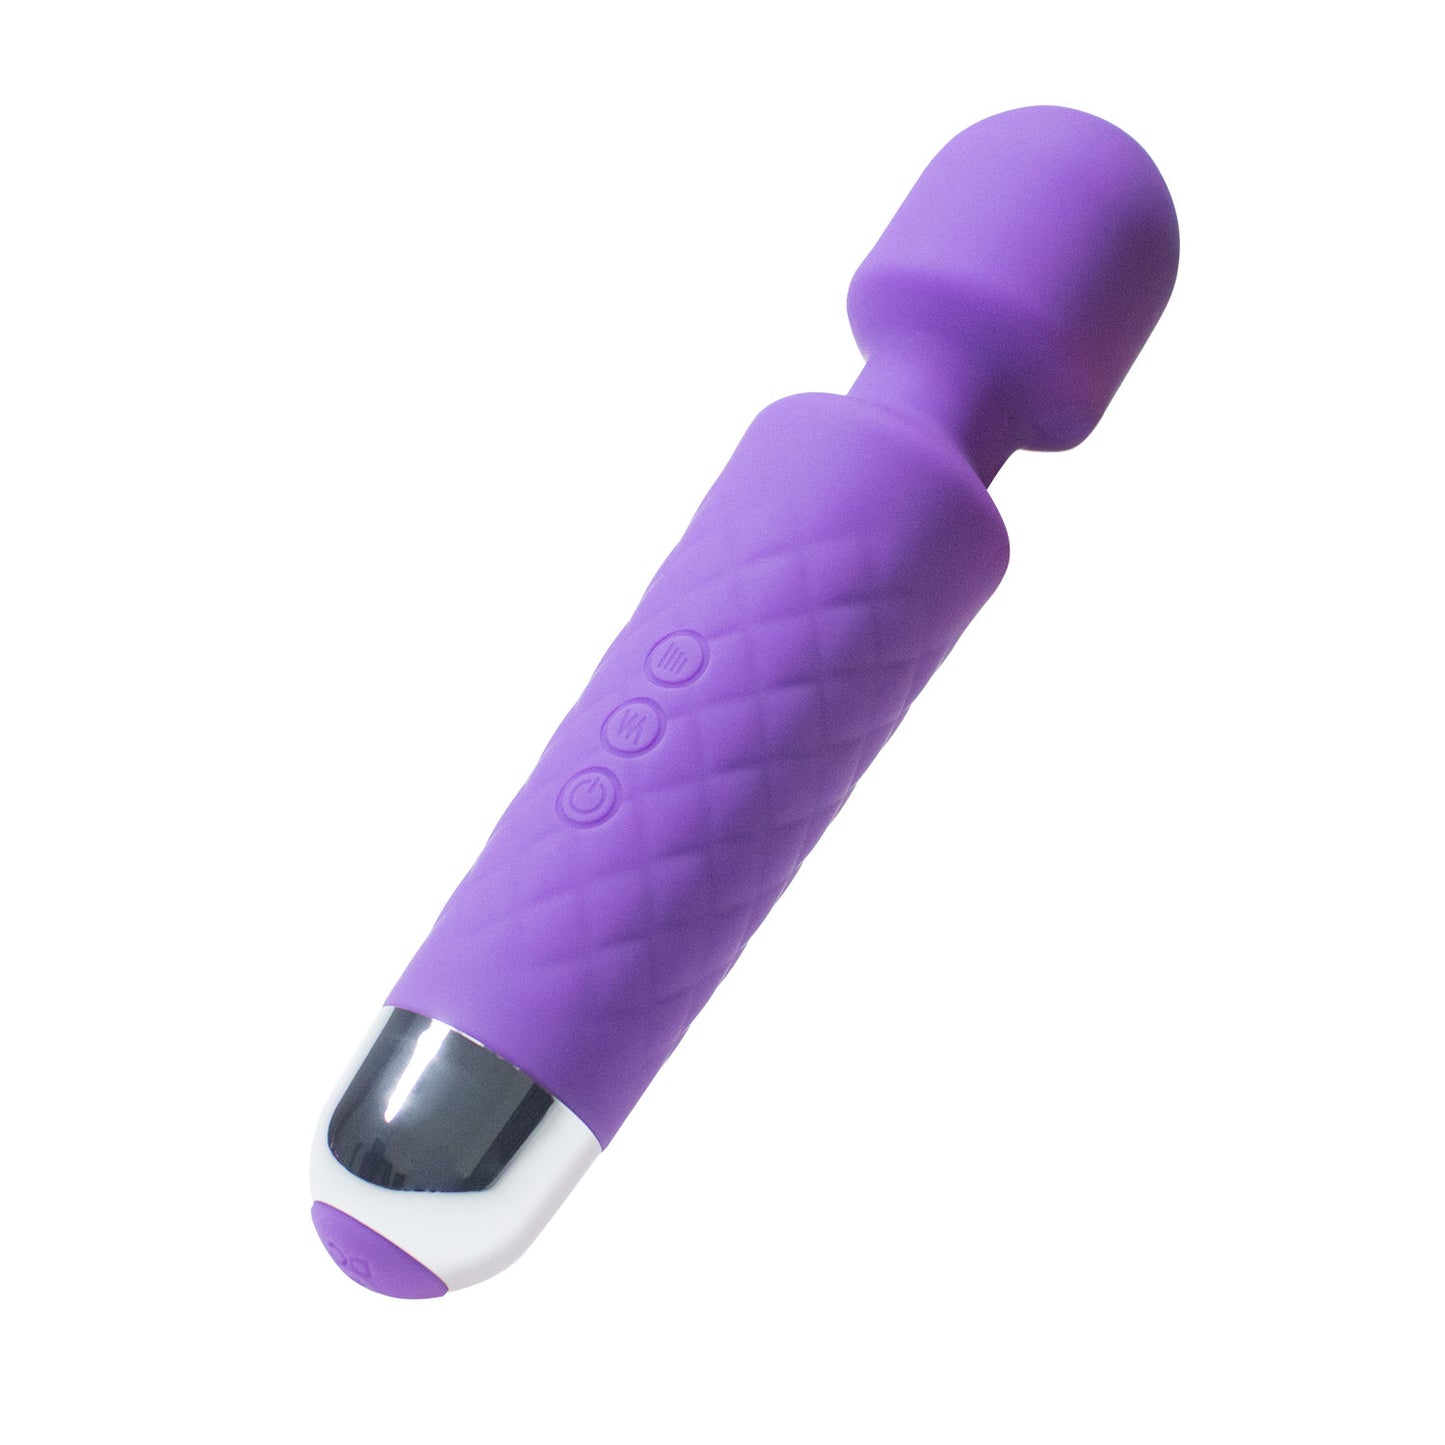 For Rechargeable Adult SEX Toys Mini Massager Wand Vibrator